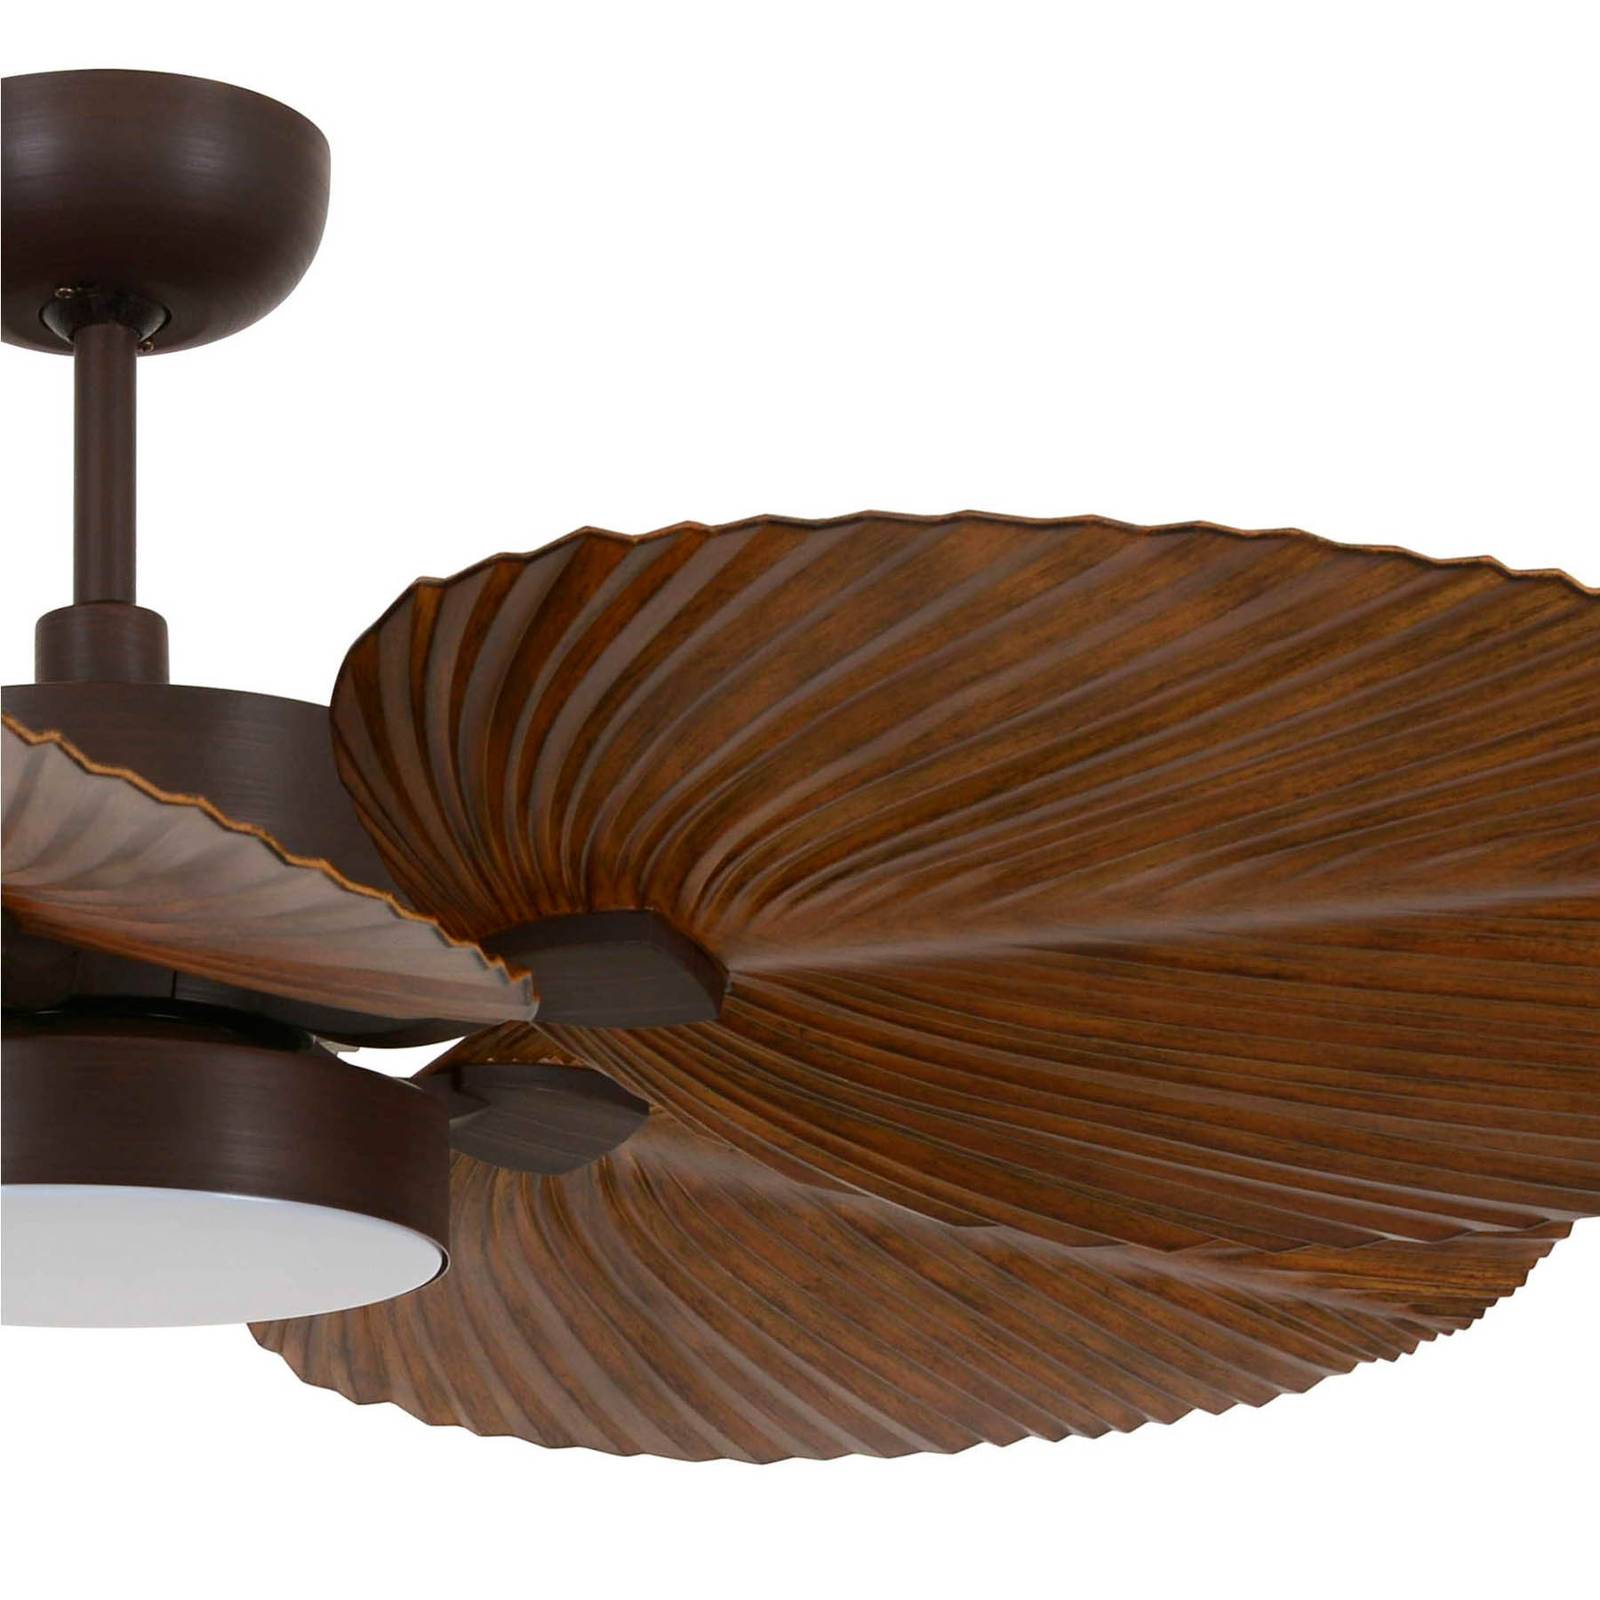 Bali ceiling fan with LED light, bronze